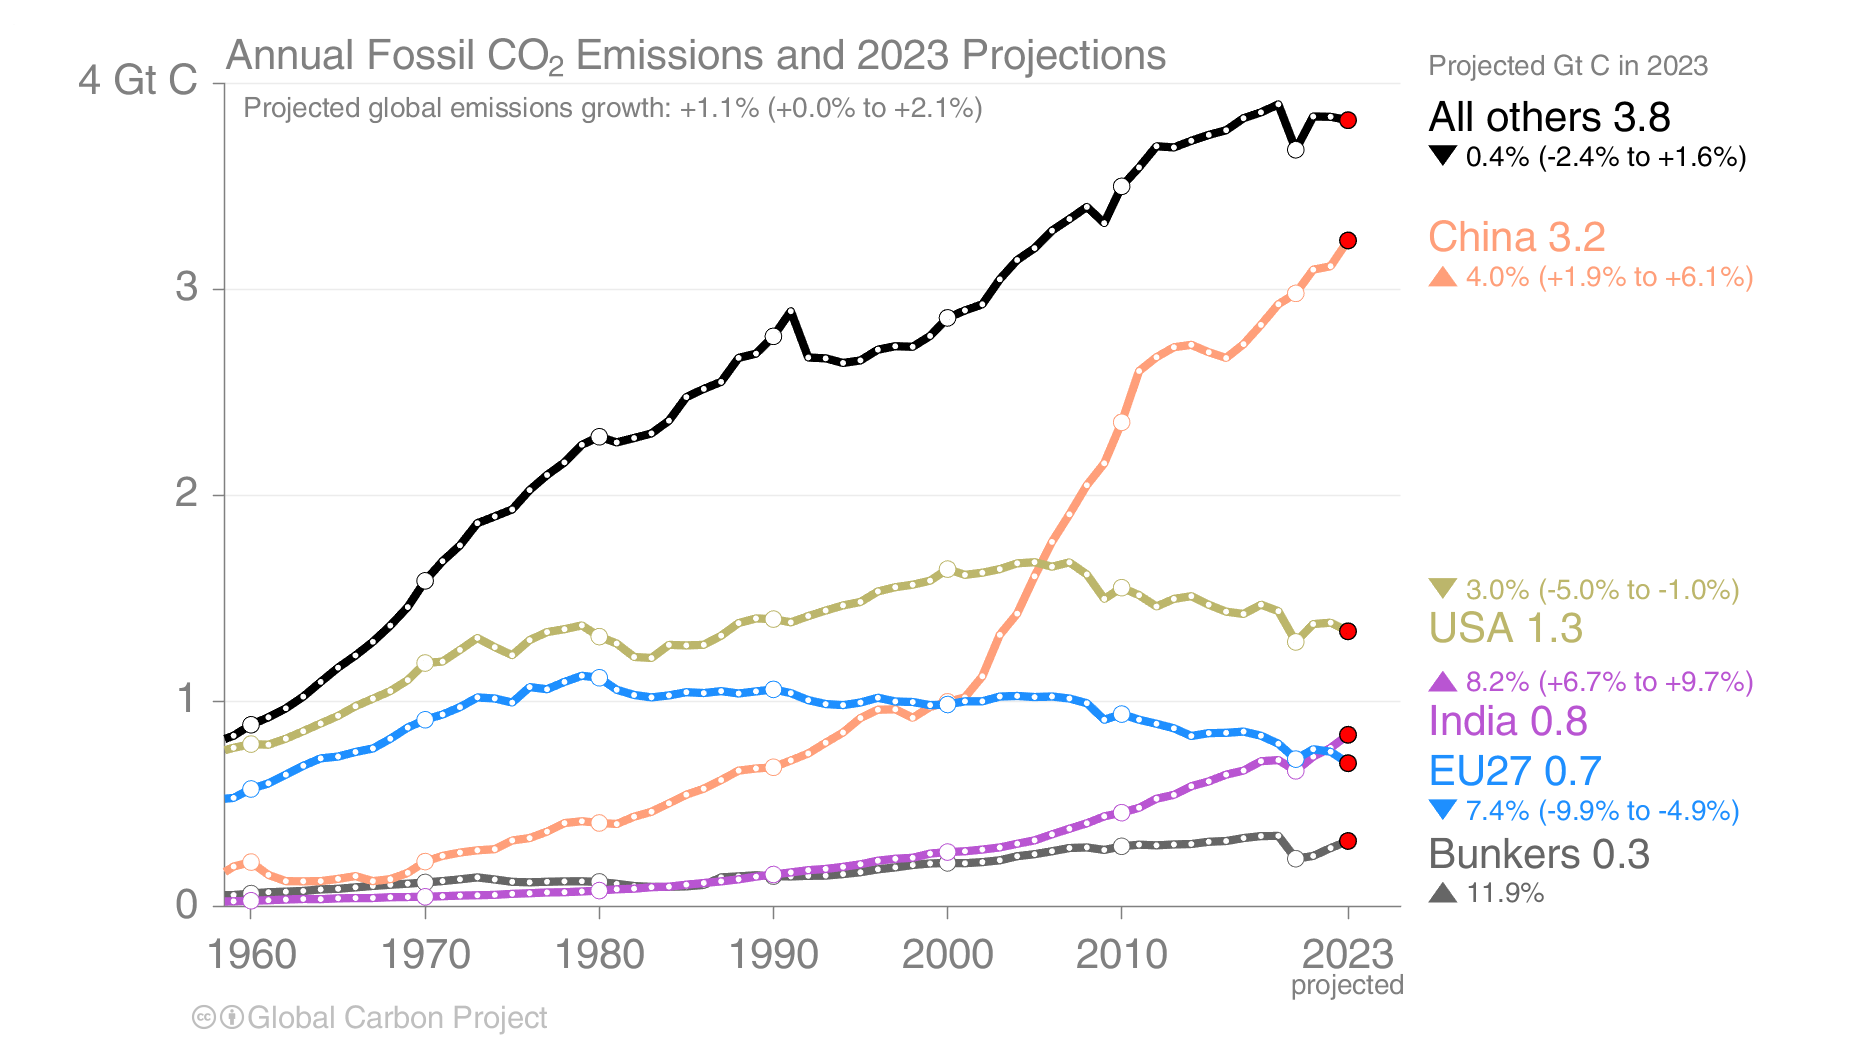 Timeseries of carbon emissions from China, USA, India and EU27 from 1960 to 2023.